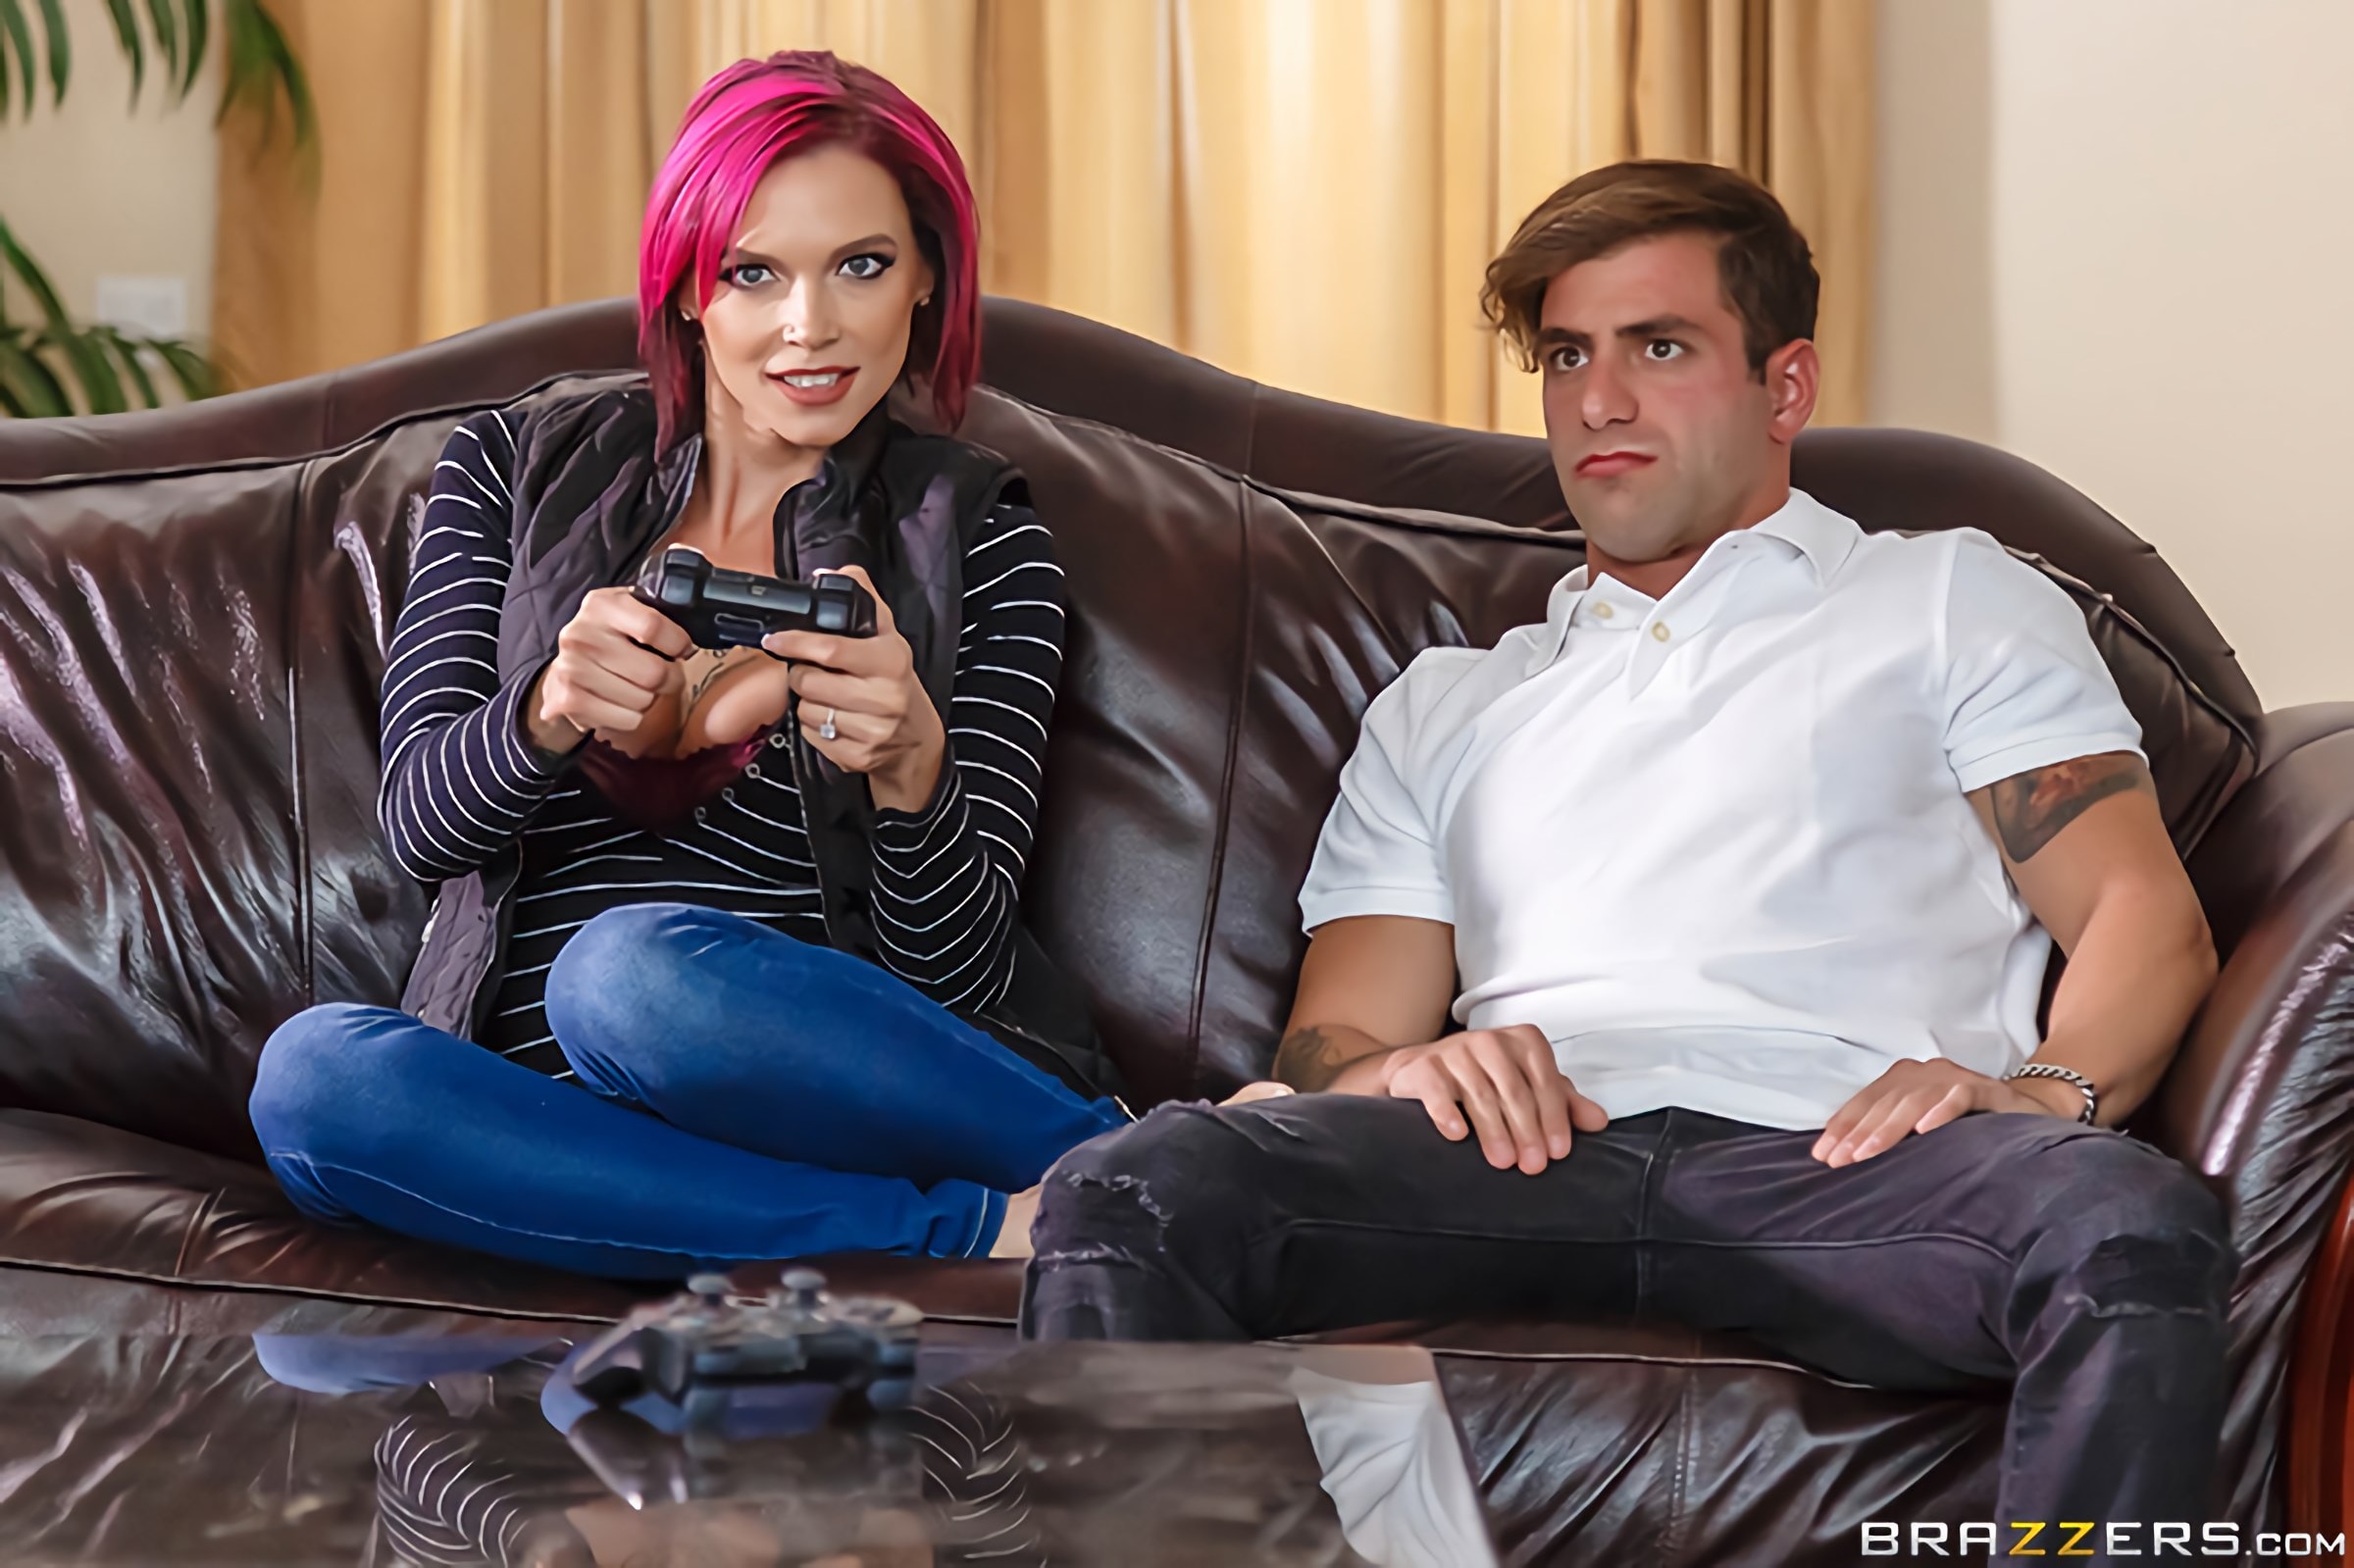 Brazzers 'Putting Her Feet Up' starring Anna Bell Peaks (Photo 1)